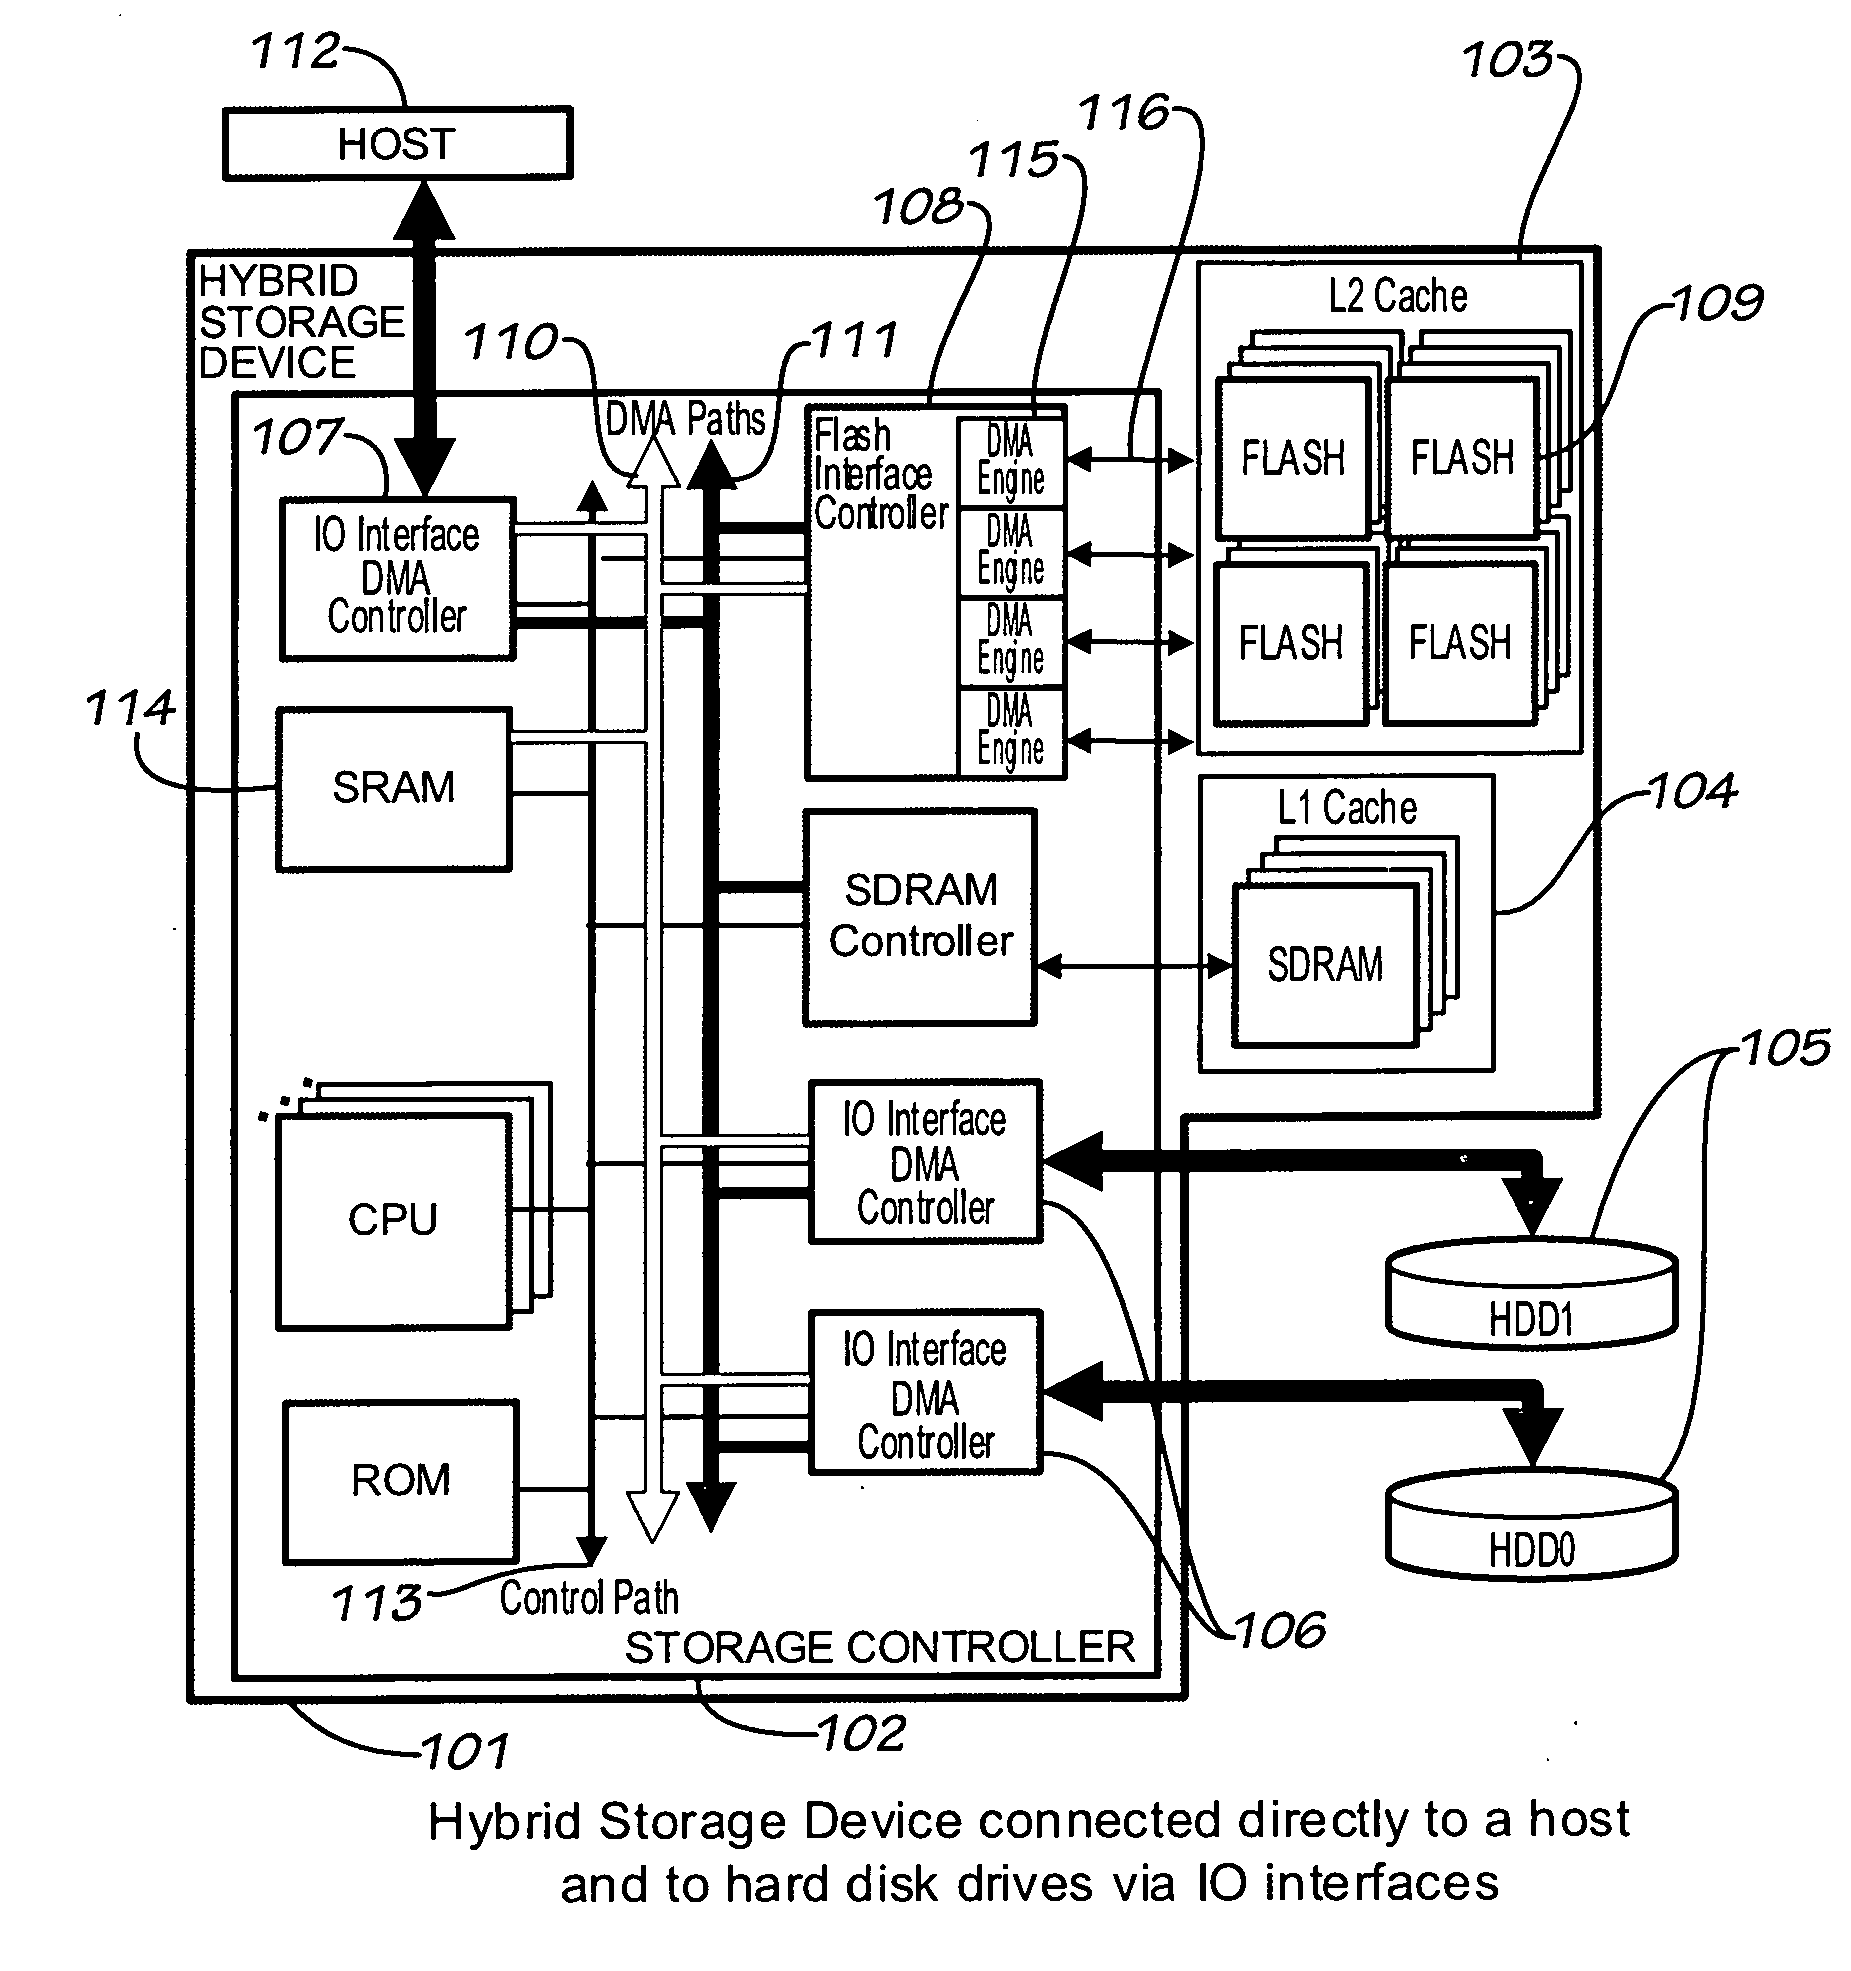 Multi-Leveled Cache Management in a Hybrid Storage System